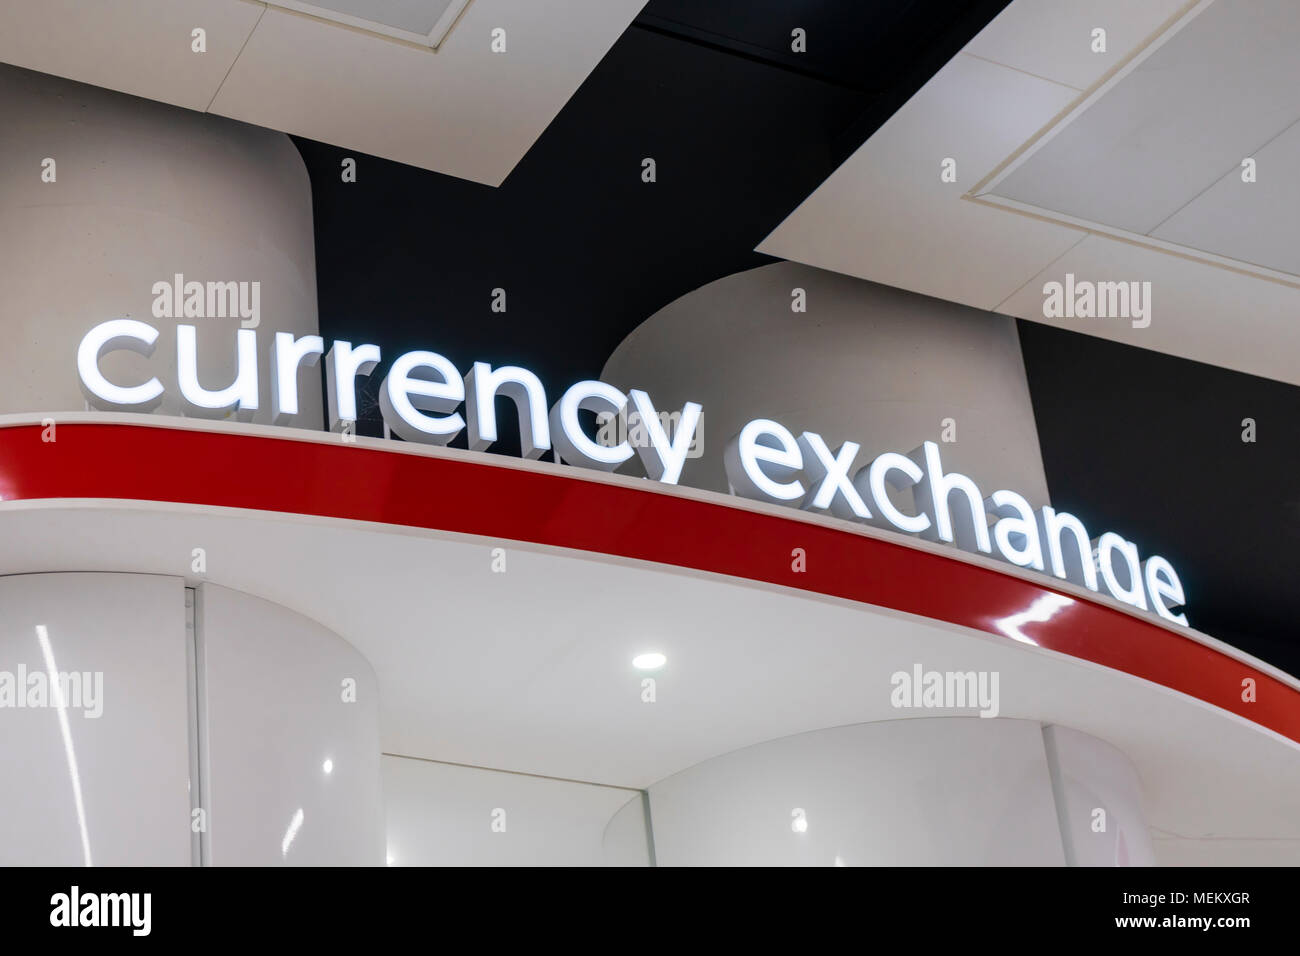 Currency exchange sign with illuminated white letters at an airport in the UK Stock Photo